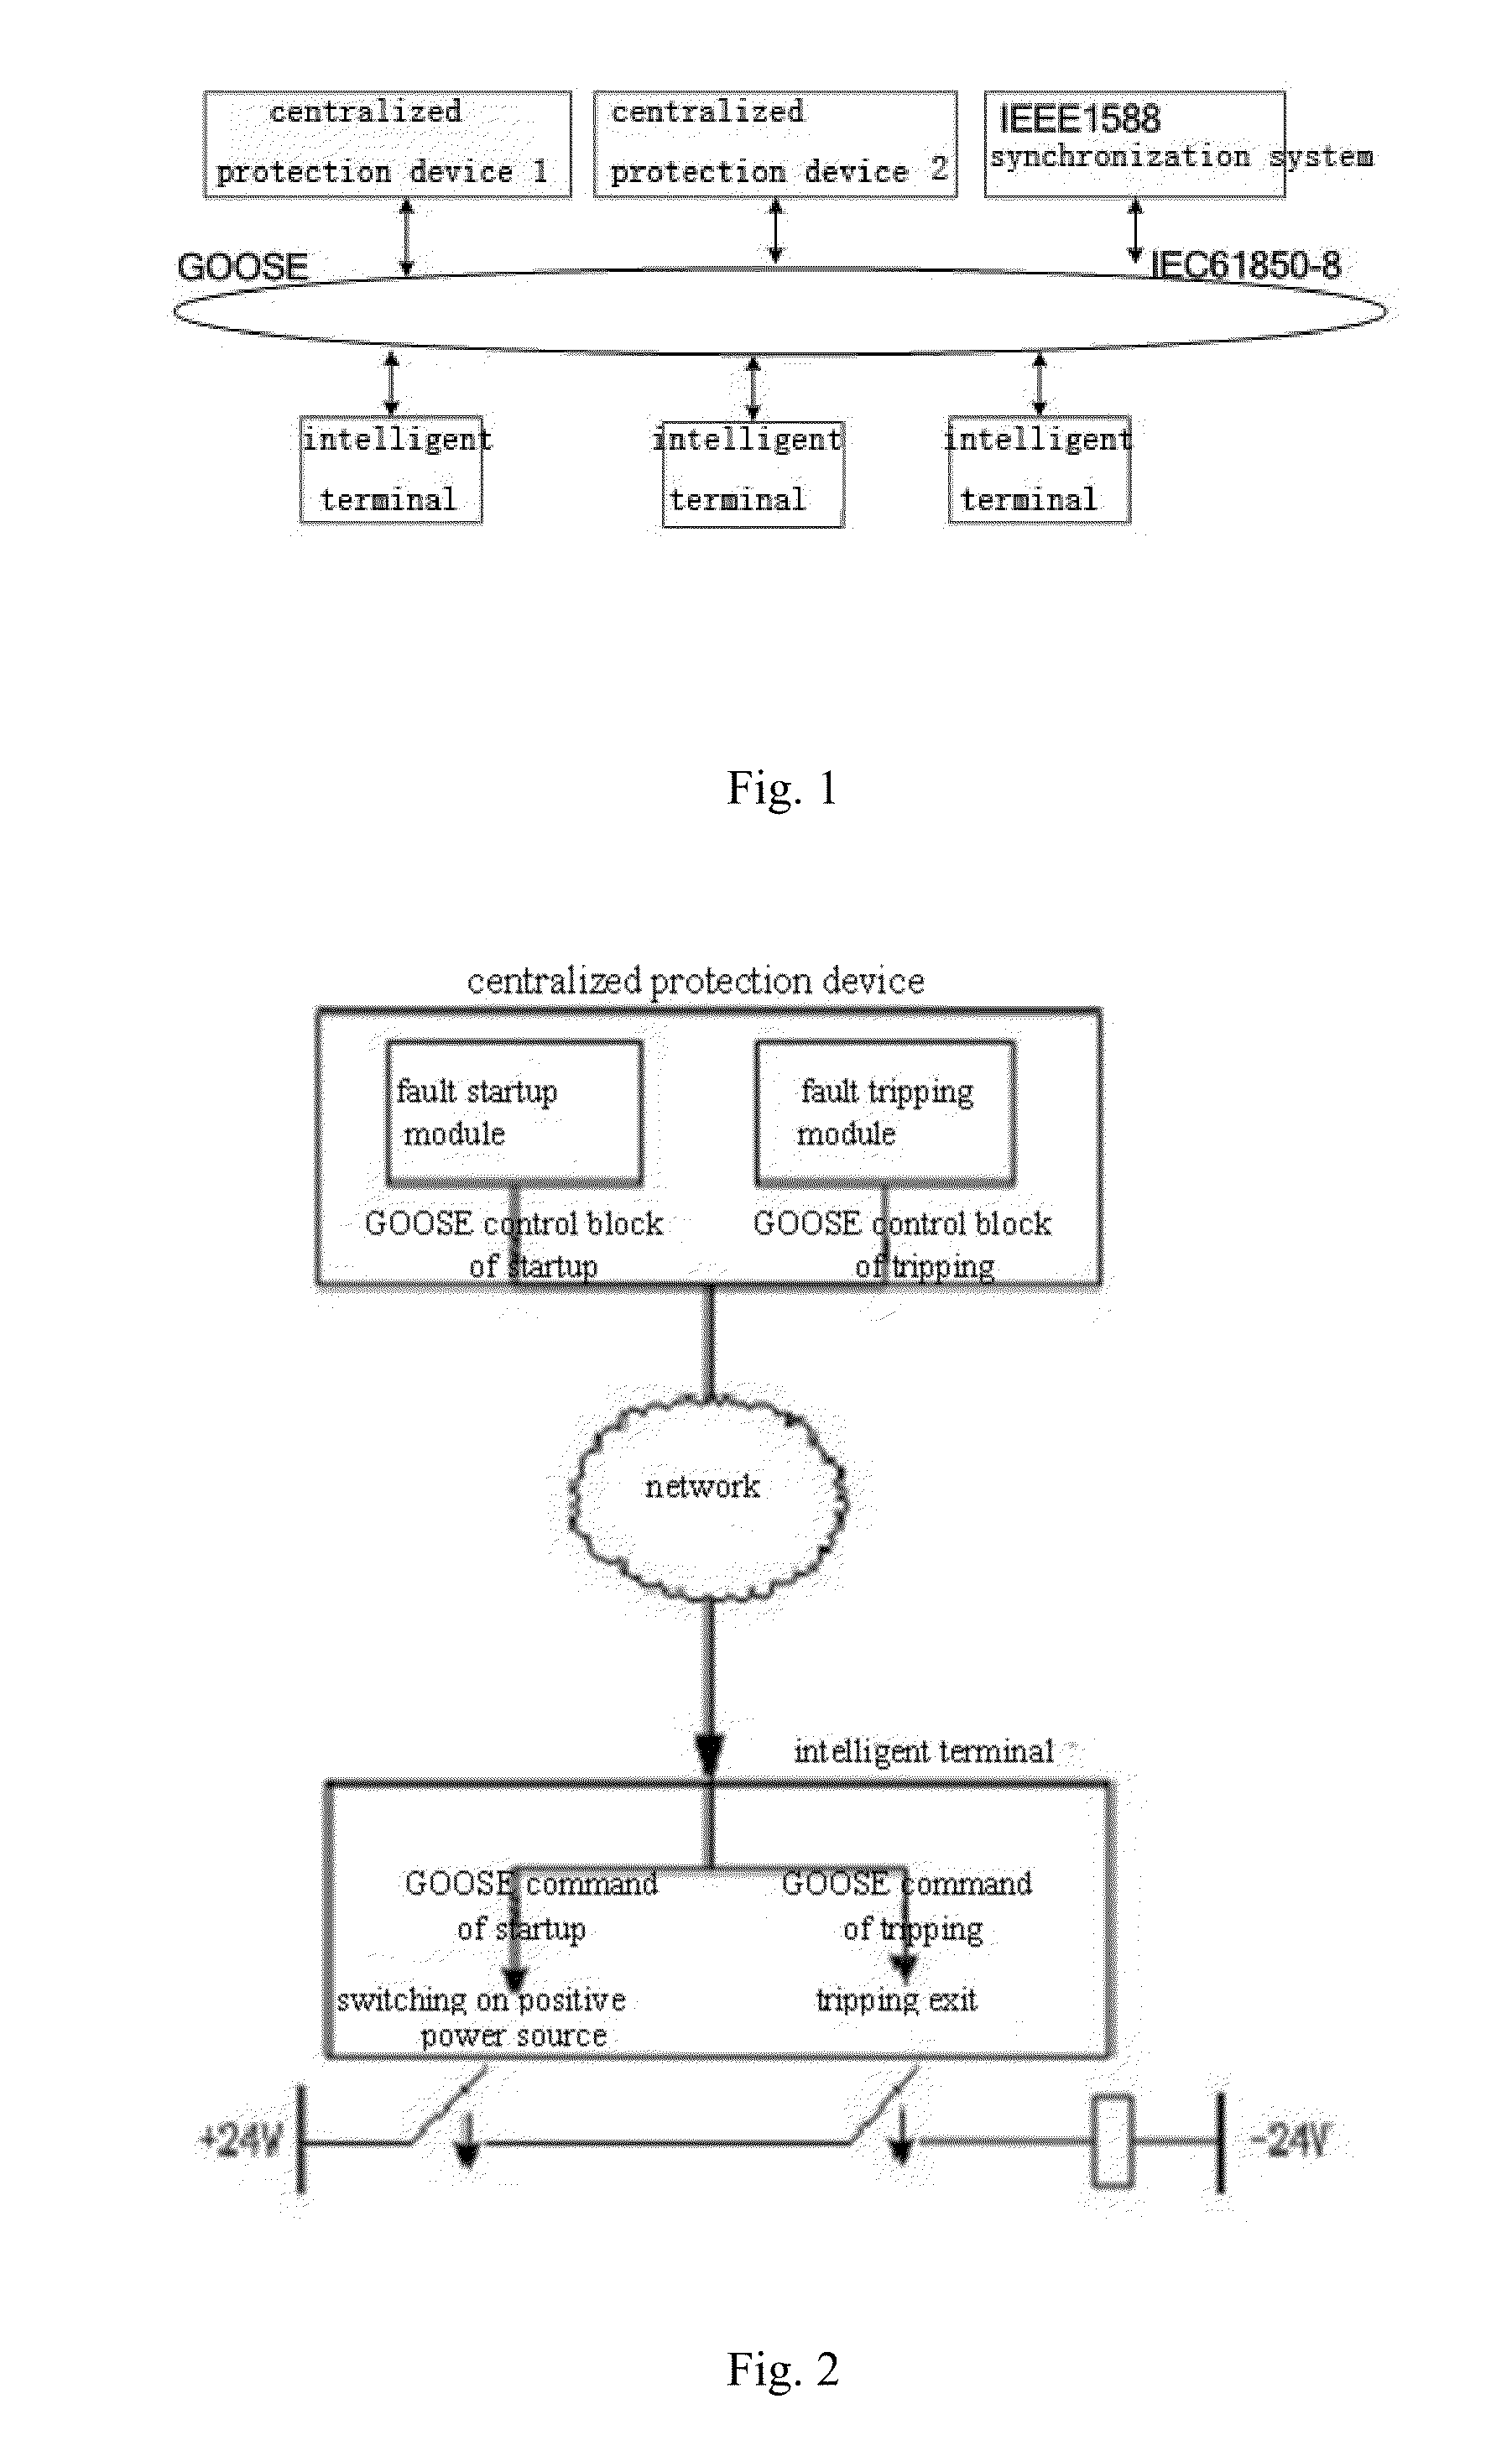 Centralized and networked protection system and method of a regional distribution network